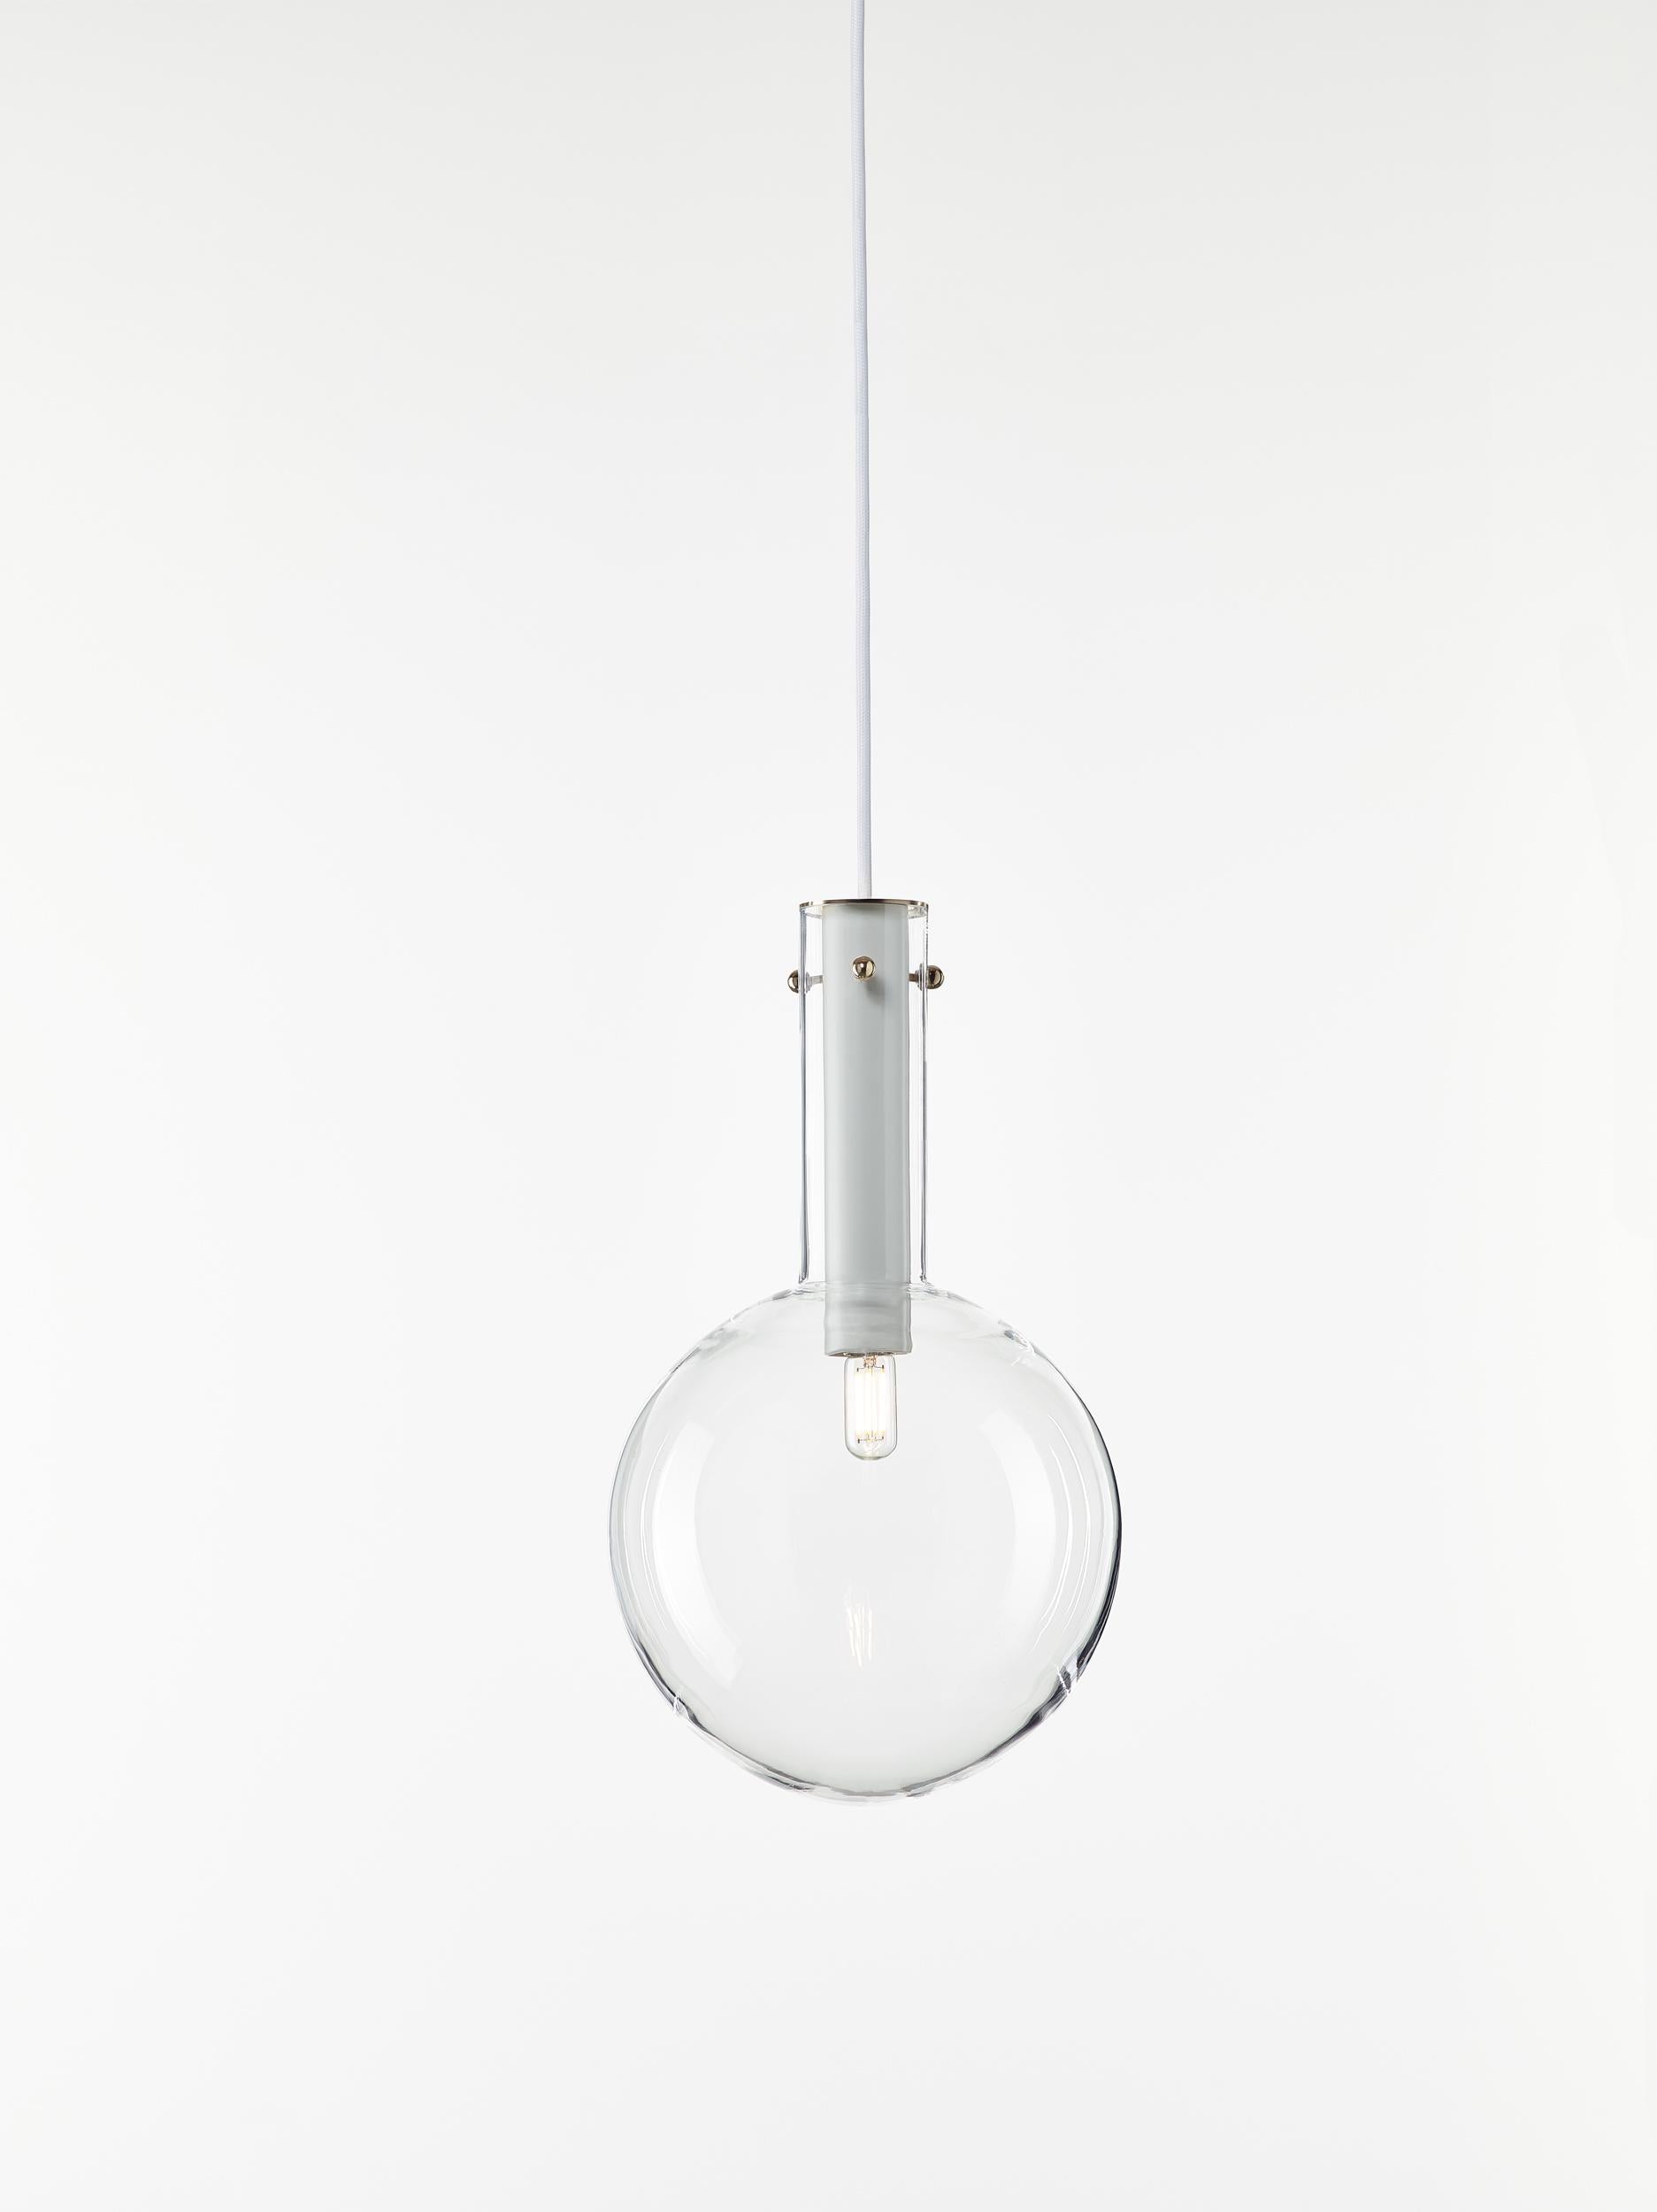 Clear Sphaerae pendant Light by Dechem Studio
Dimensions: D 20 x H 180 cm
Materials: brass, metal, glass.
Also available: different finishes and colors available.
Only one homogenous piece of hand blown glass creates the main body of Sphaerae